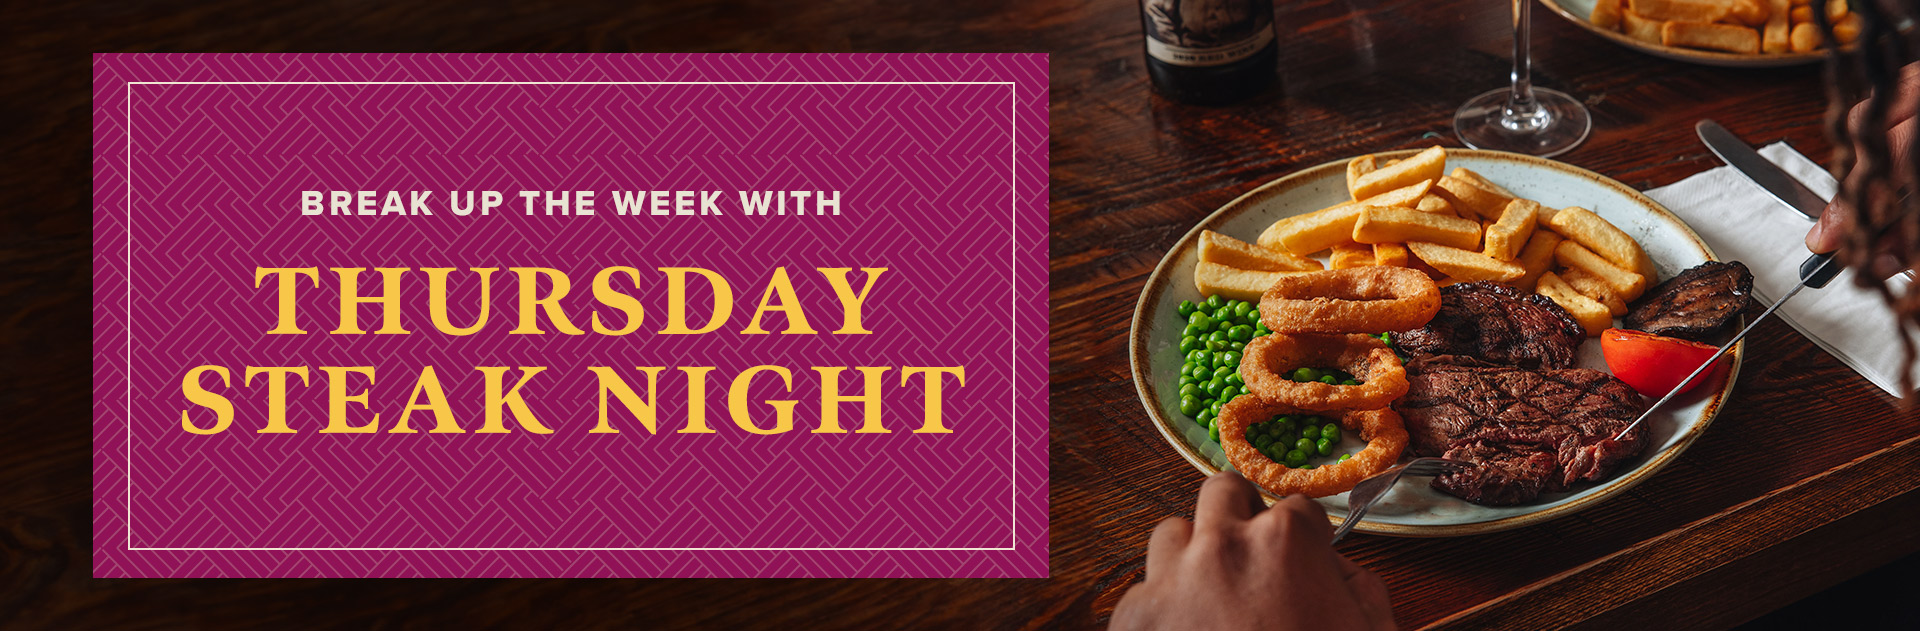 Thursday Steak Night at The Hardwick Arms